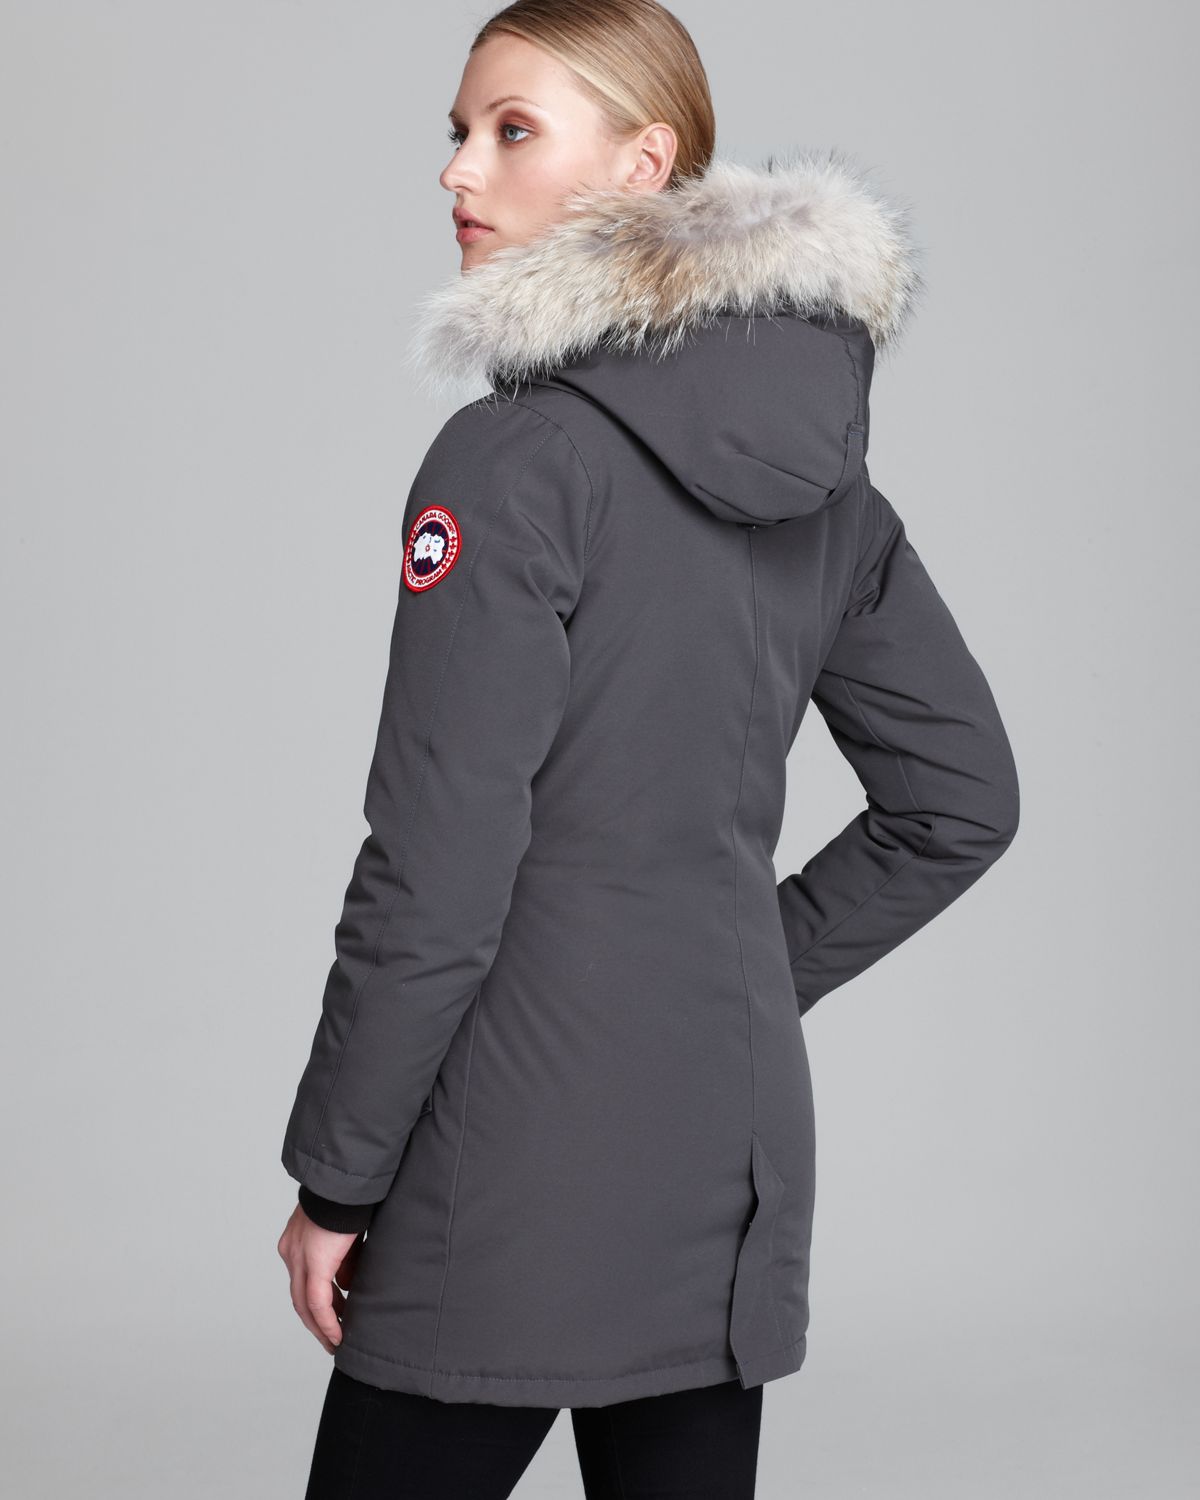 canada goose jacket one day sale